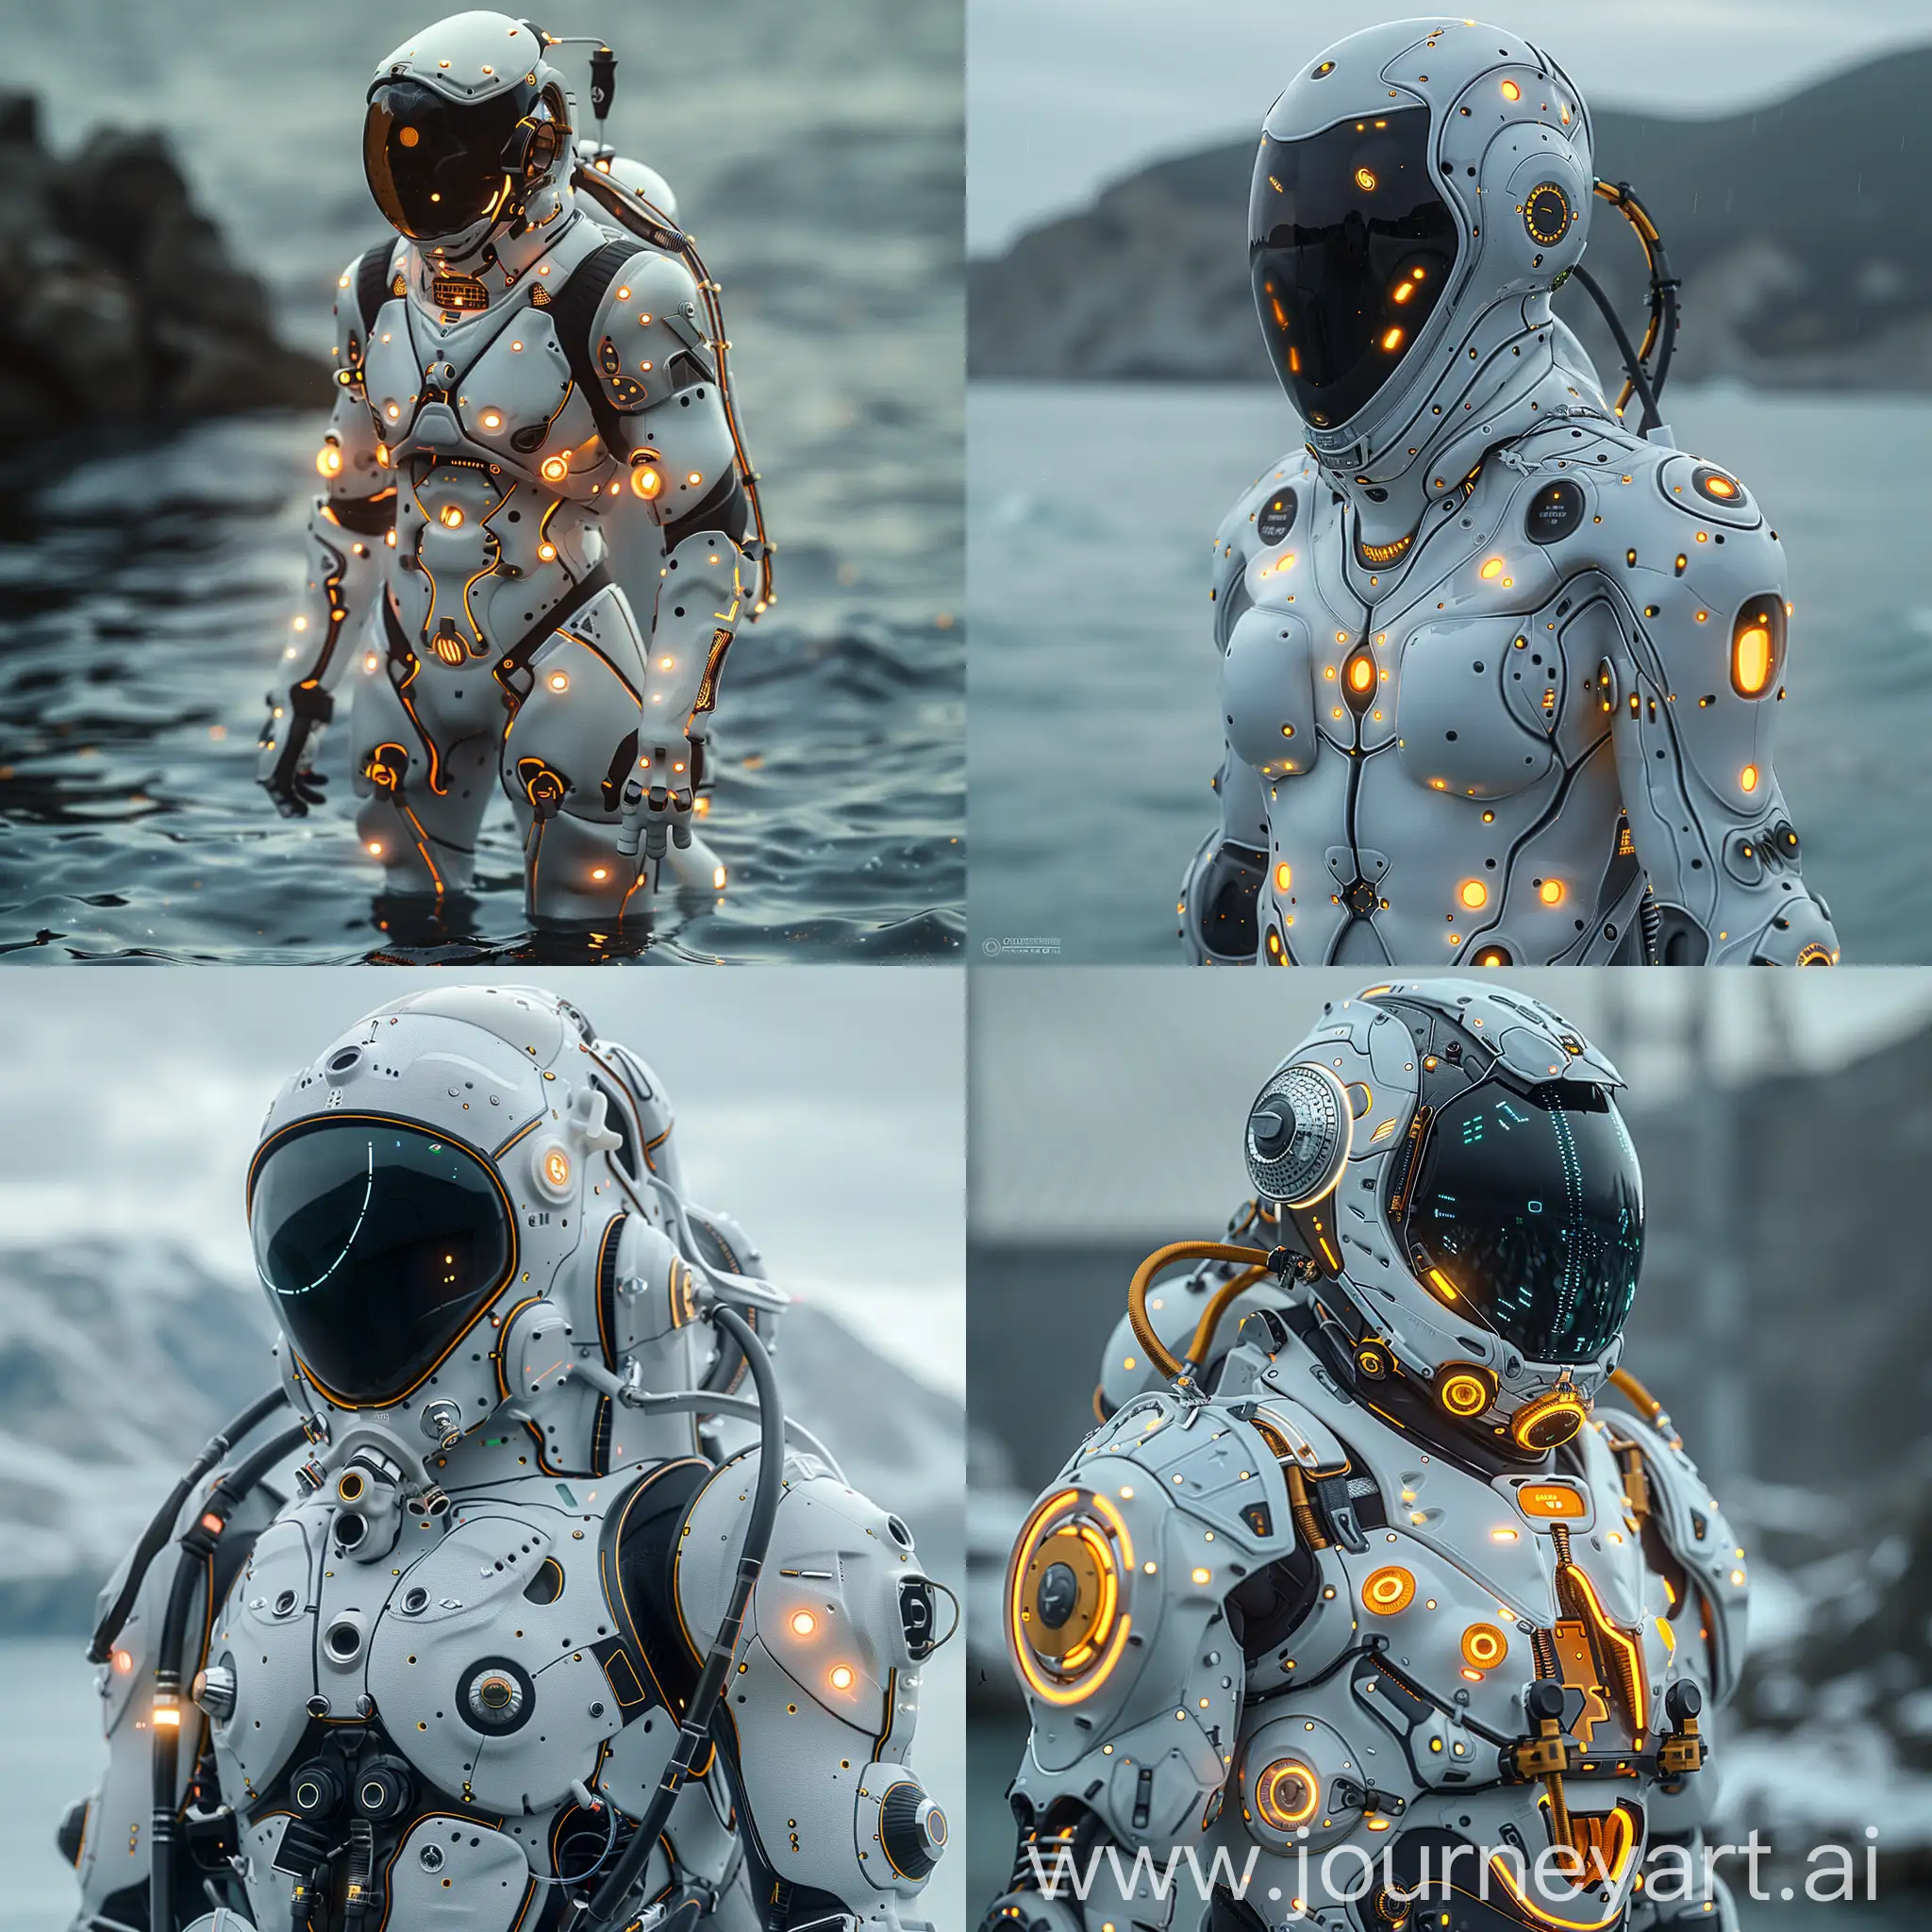 Futuristic-Divers-Costume-with-Biomimetic-Design-and-Integrated-Environmental-Controls